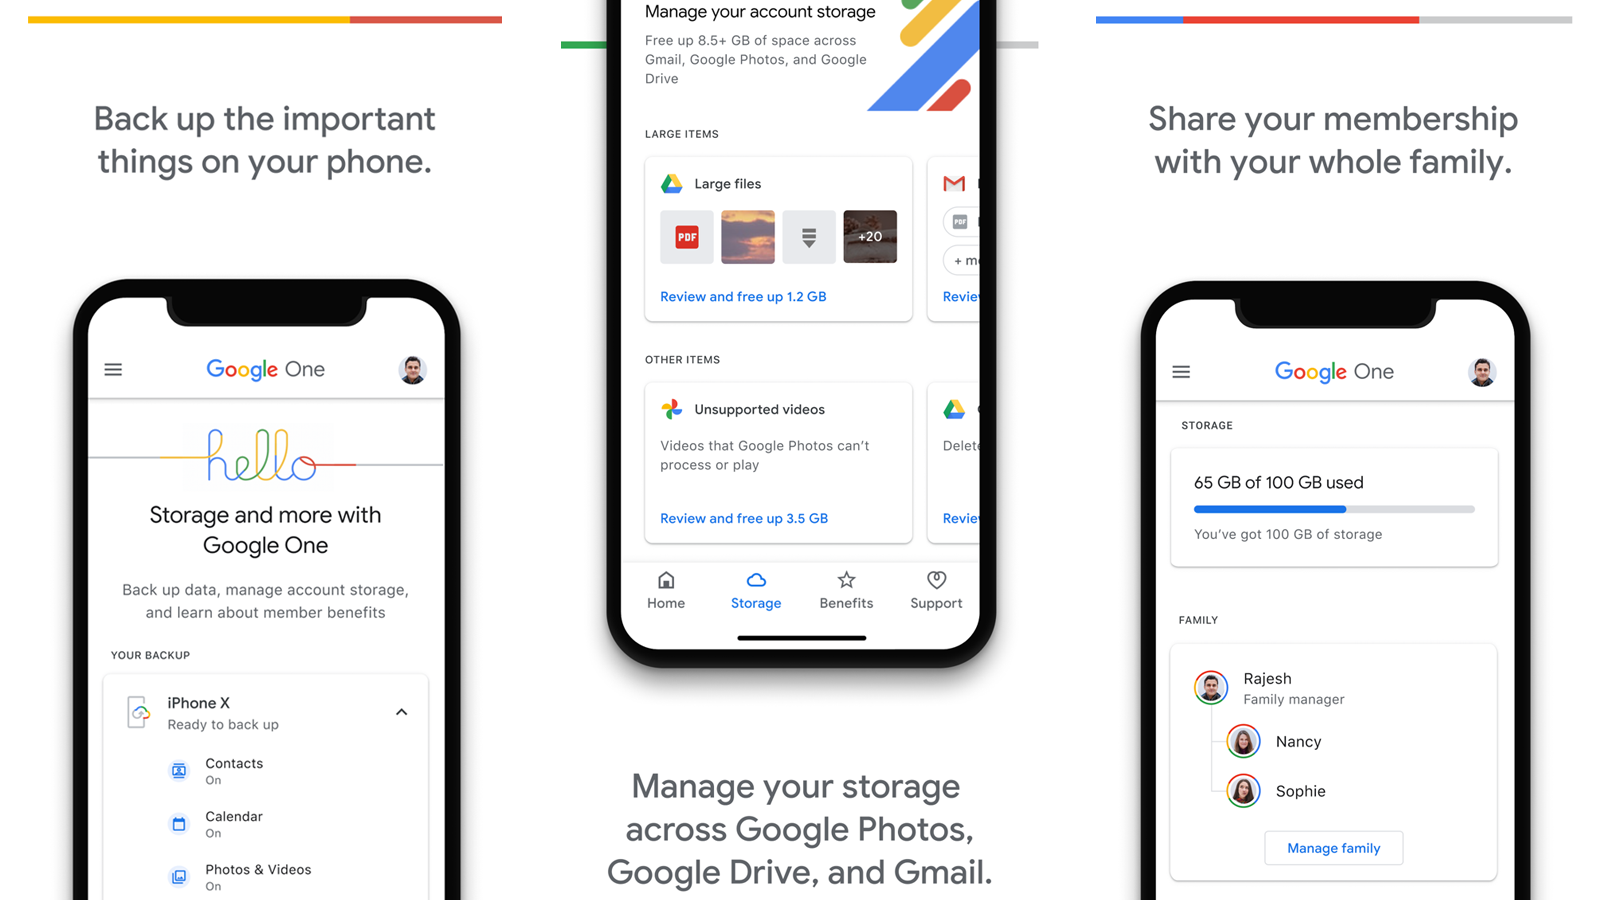 Google One app with storage management and sharing options